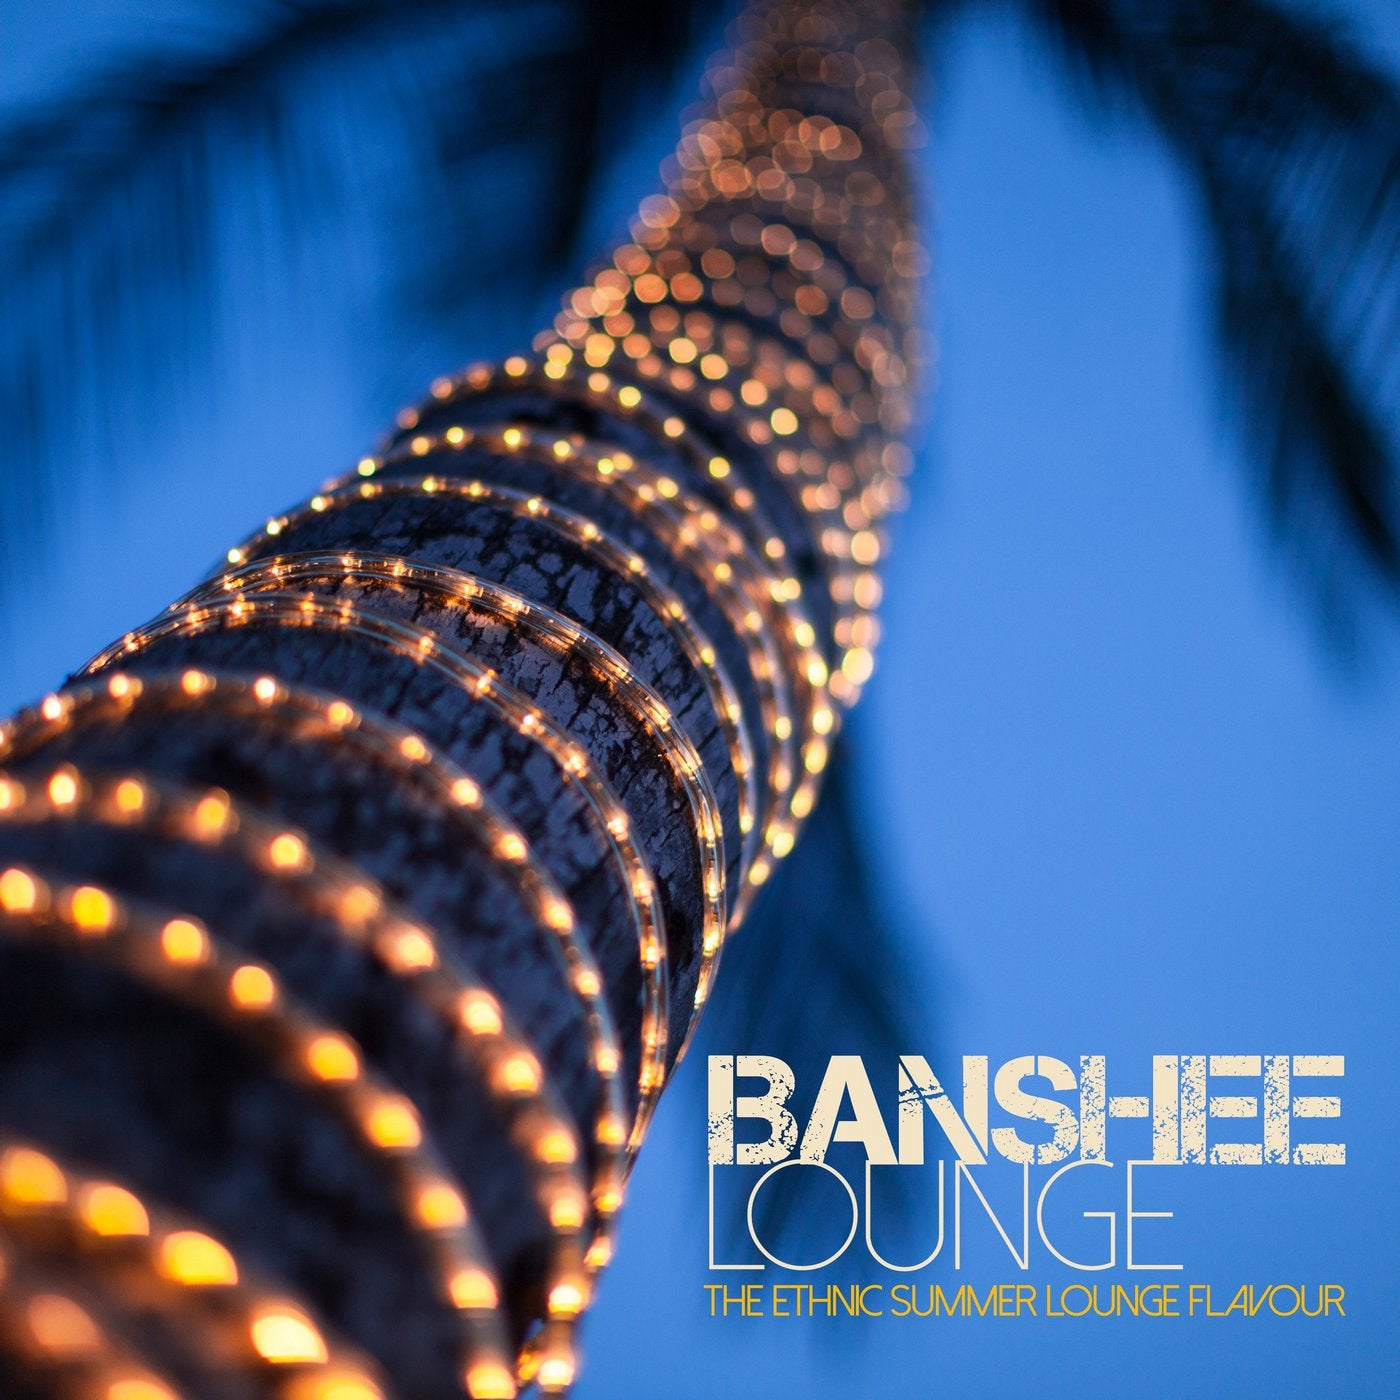 Banshee Lounge - The Ethnic Summer Lounge Flavour